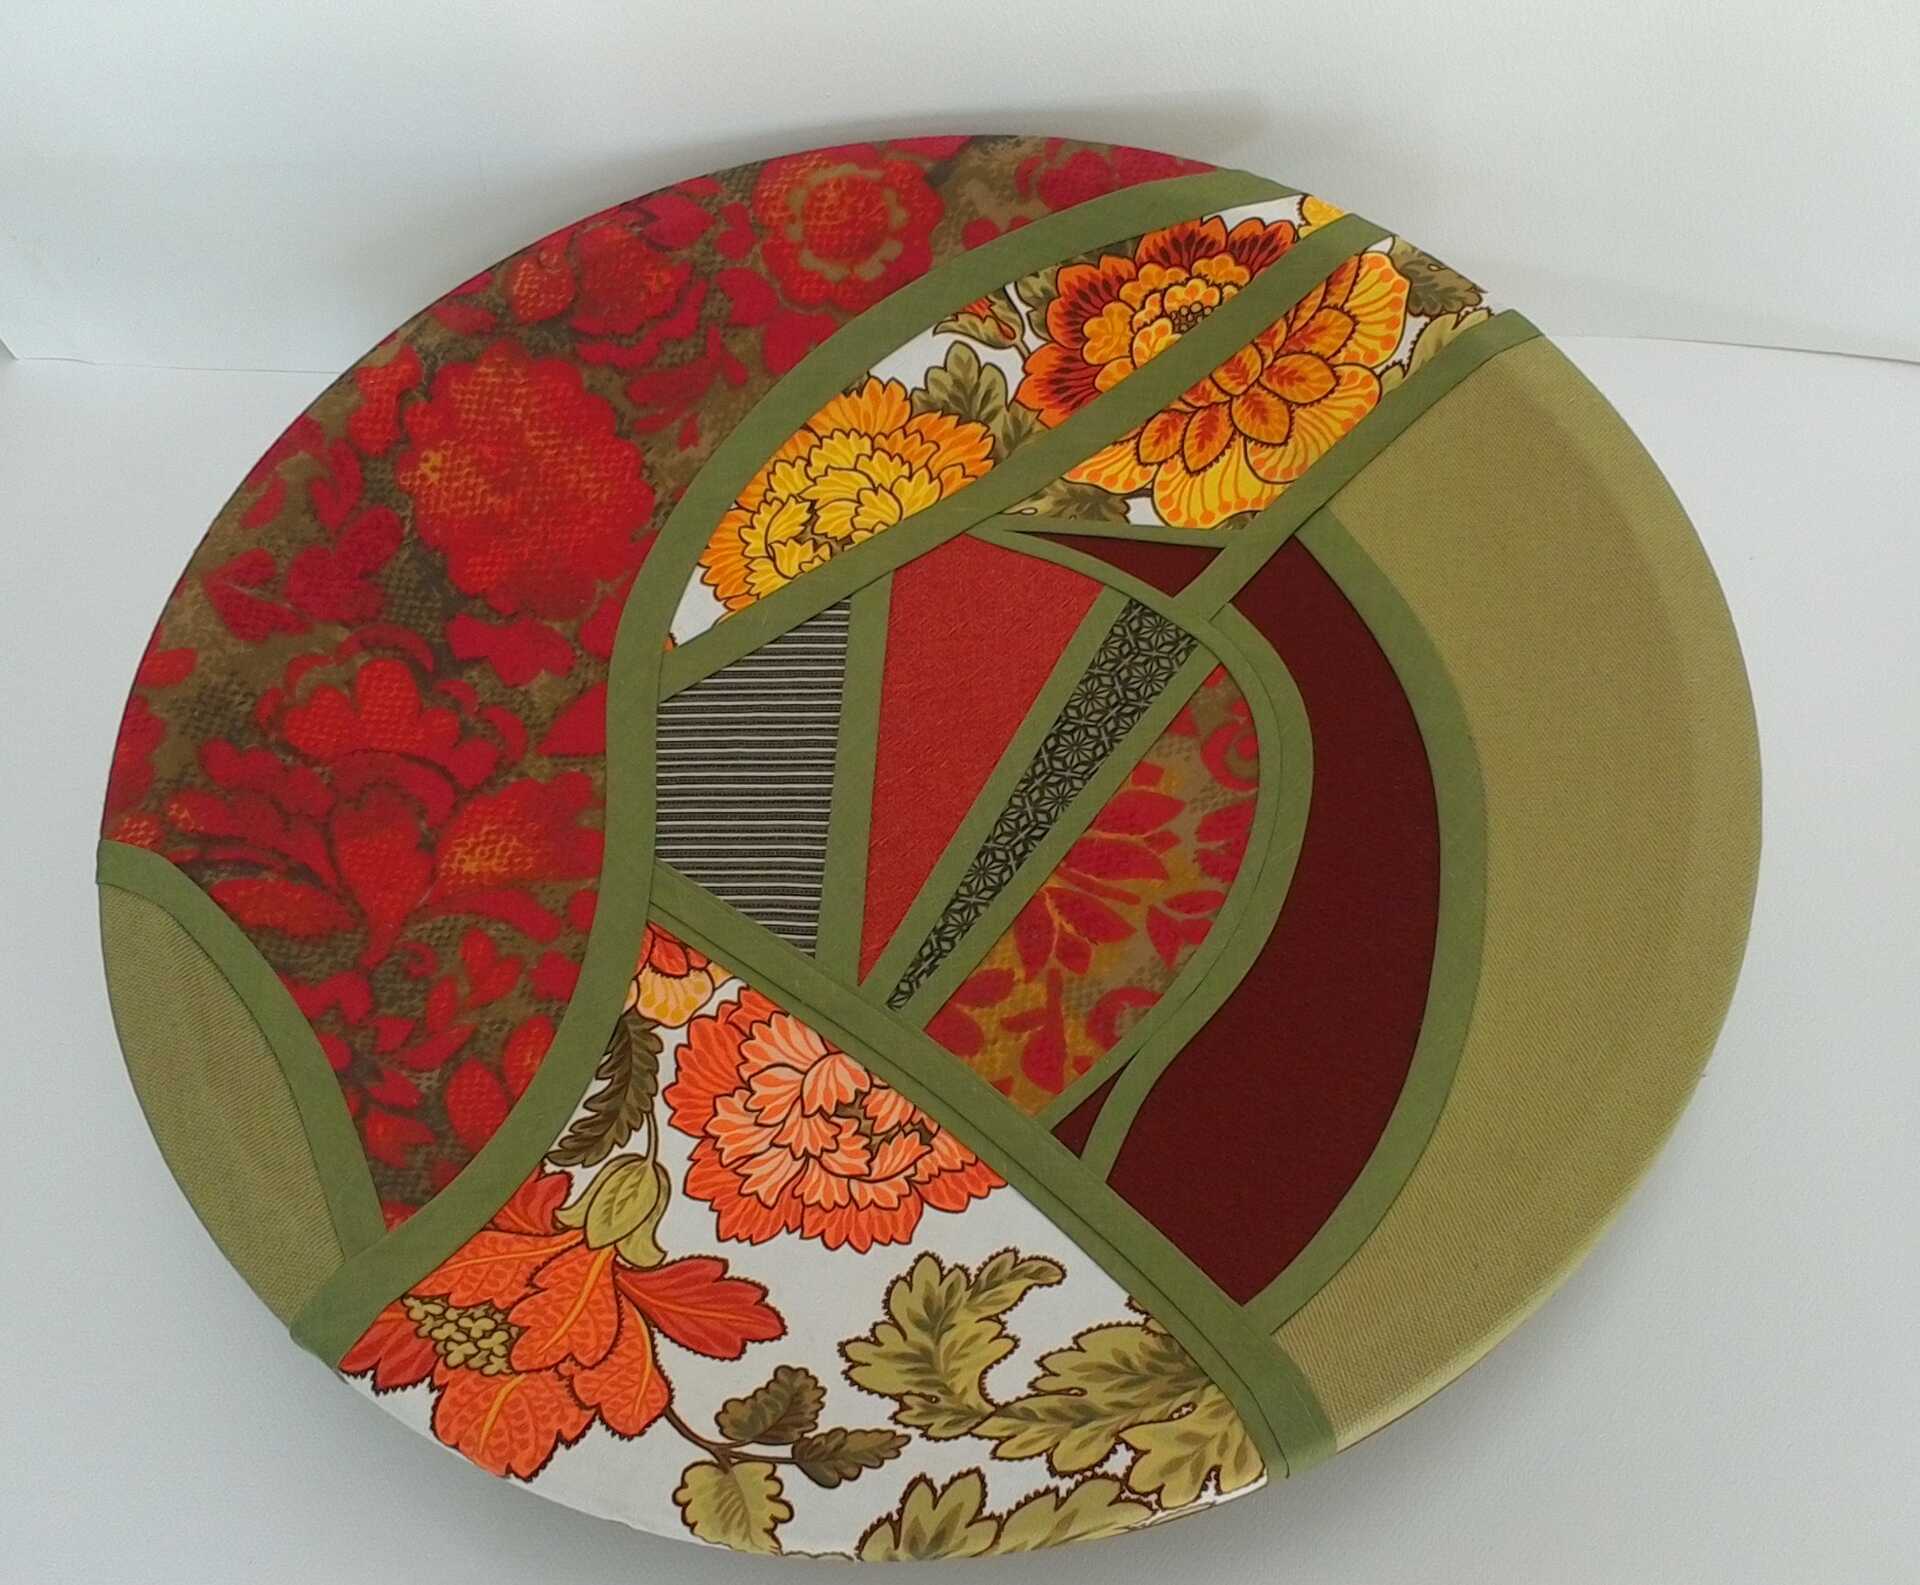 Sculpture 'A Dish to Share' by Libby Bloxham. A round dinner plate is covered in swatches of fabric favouring olive green and orange tones. The fabric covering is segmented into irregular panels with thick olive green binding, complimenting the contours of the shape.